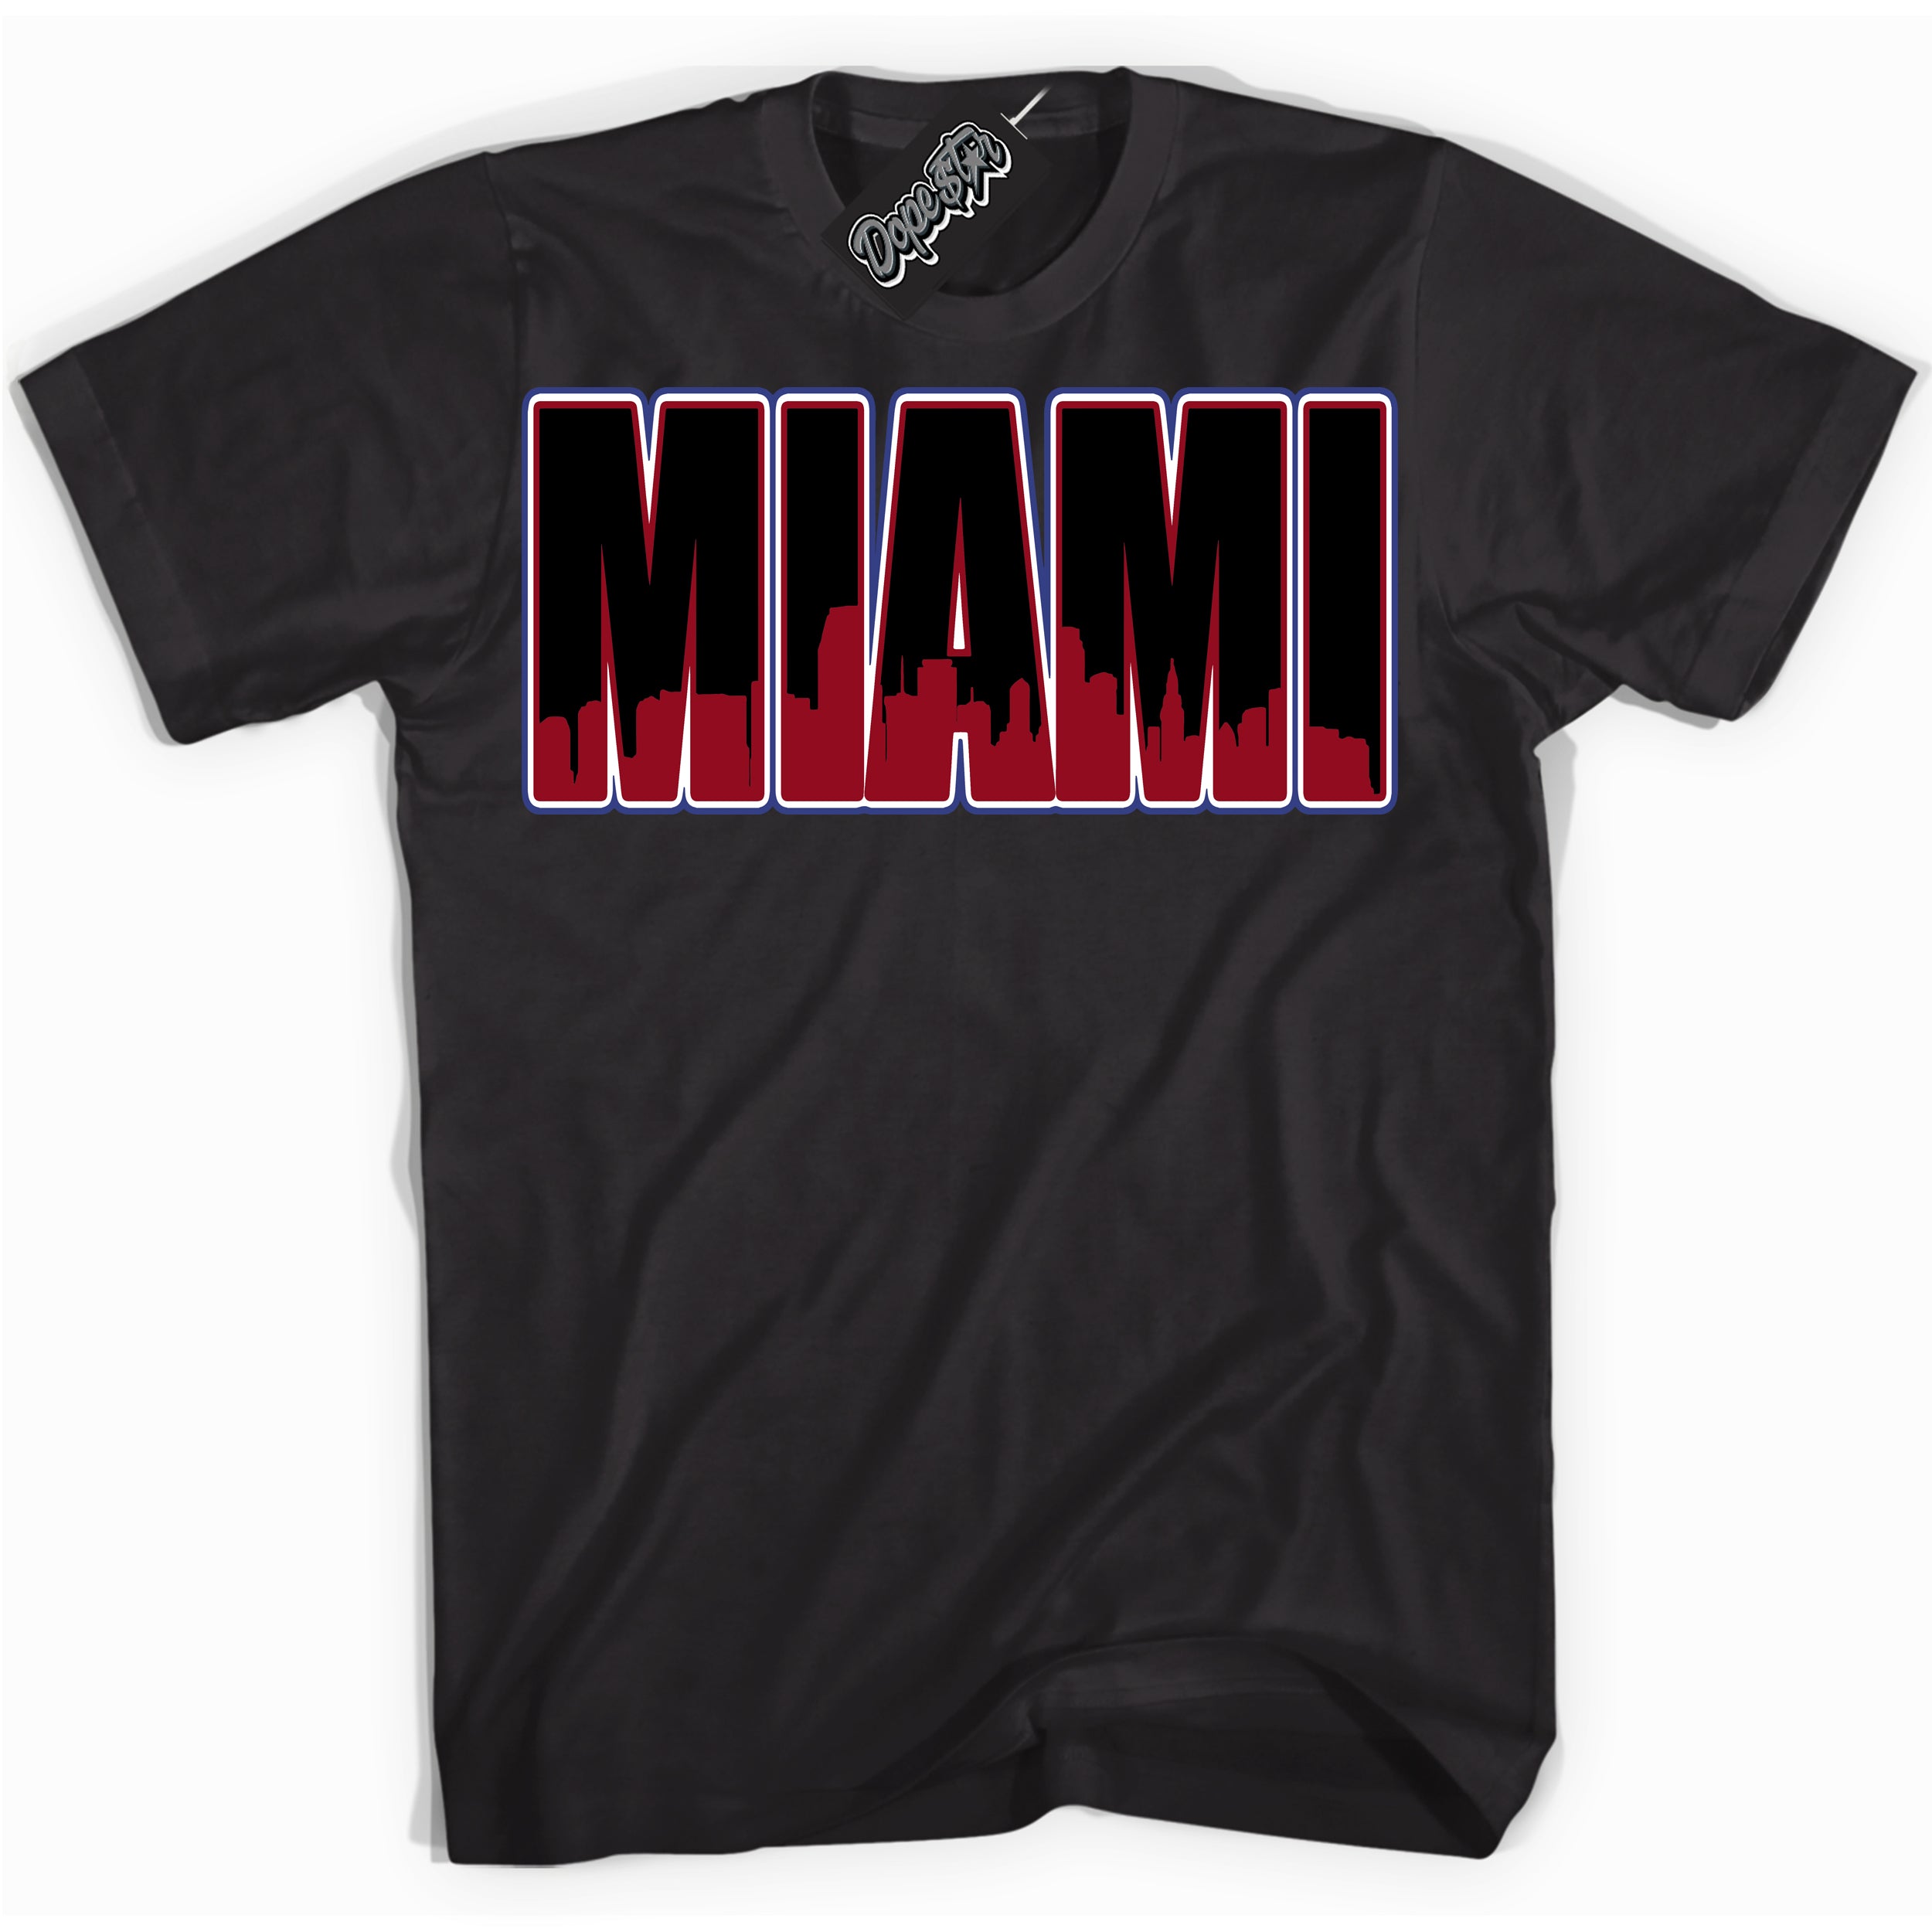 Cool Black Shirt with “ Miami ” design that perfectly matches Playoffs 8s Sneakers.